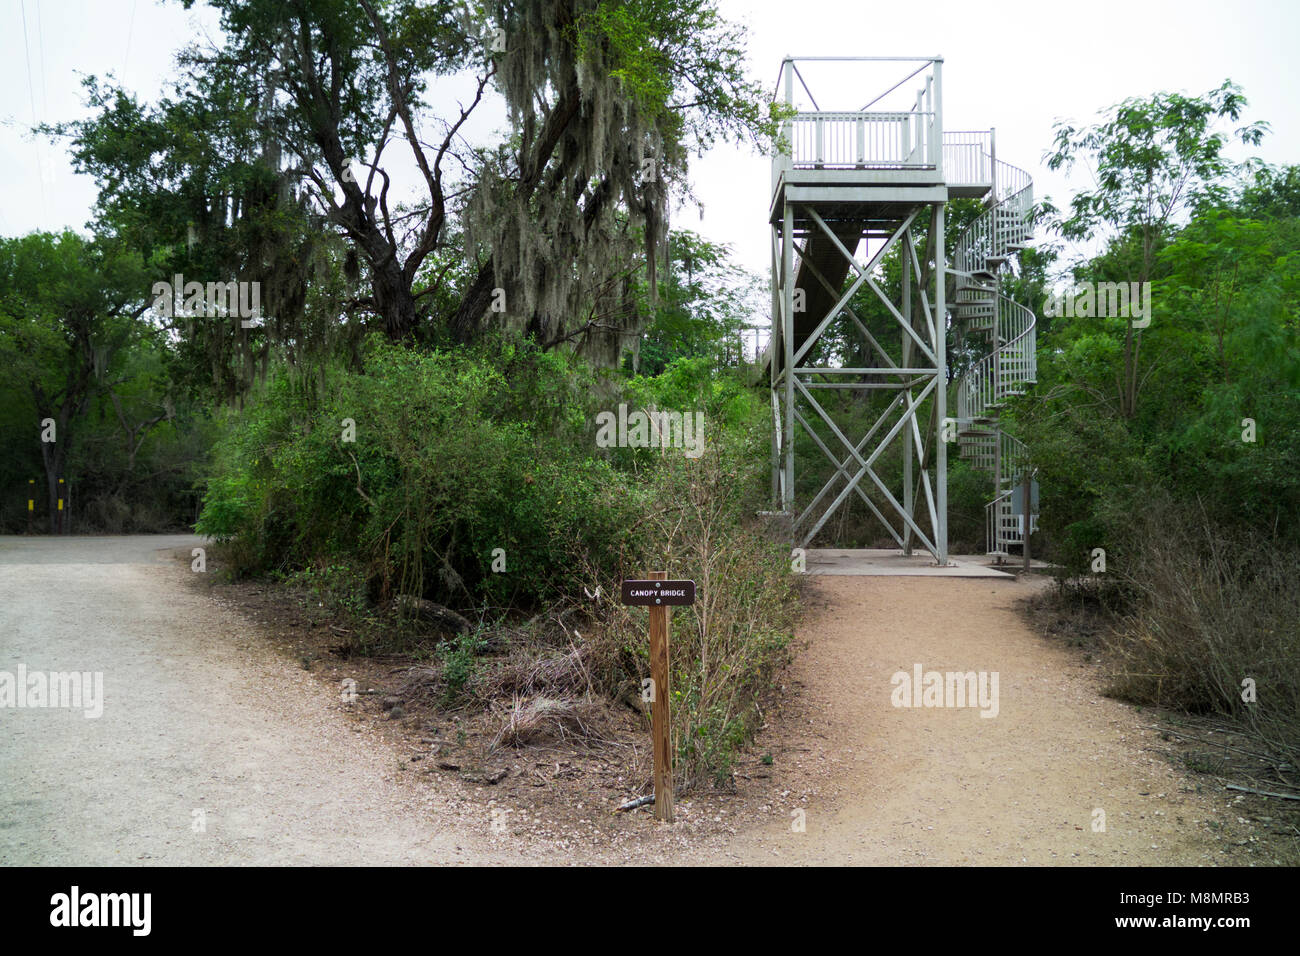 Canopy Bridge and supporting towers that allow pedestrians to walk above the riparian forest canopy at Santa Ana National Wildlife Refuge near Alamo,  Stock Photo